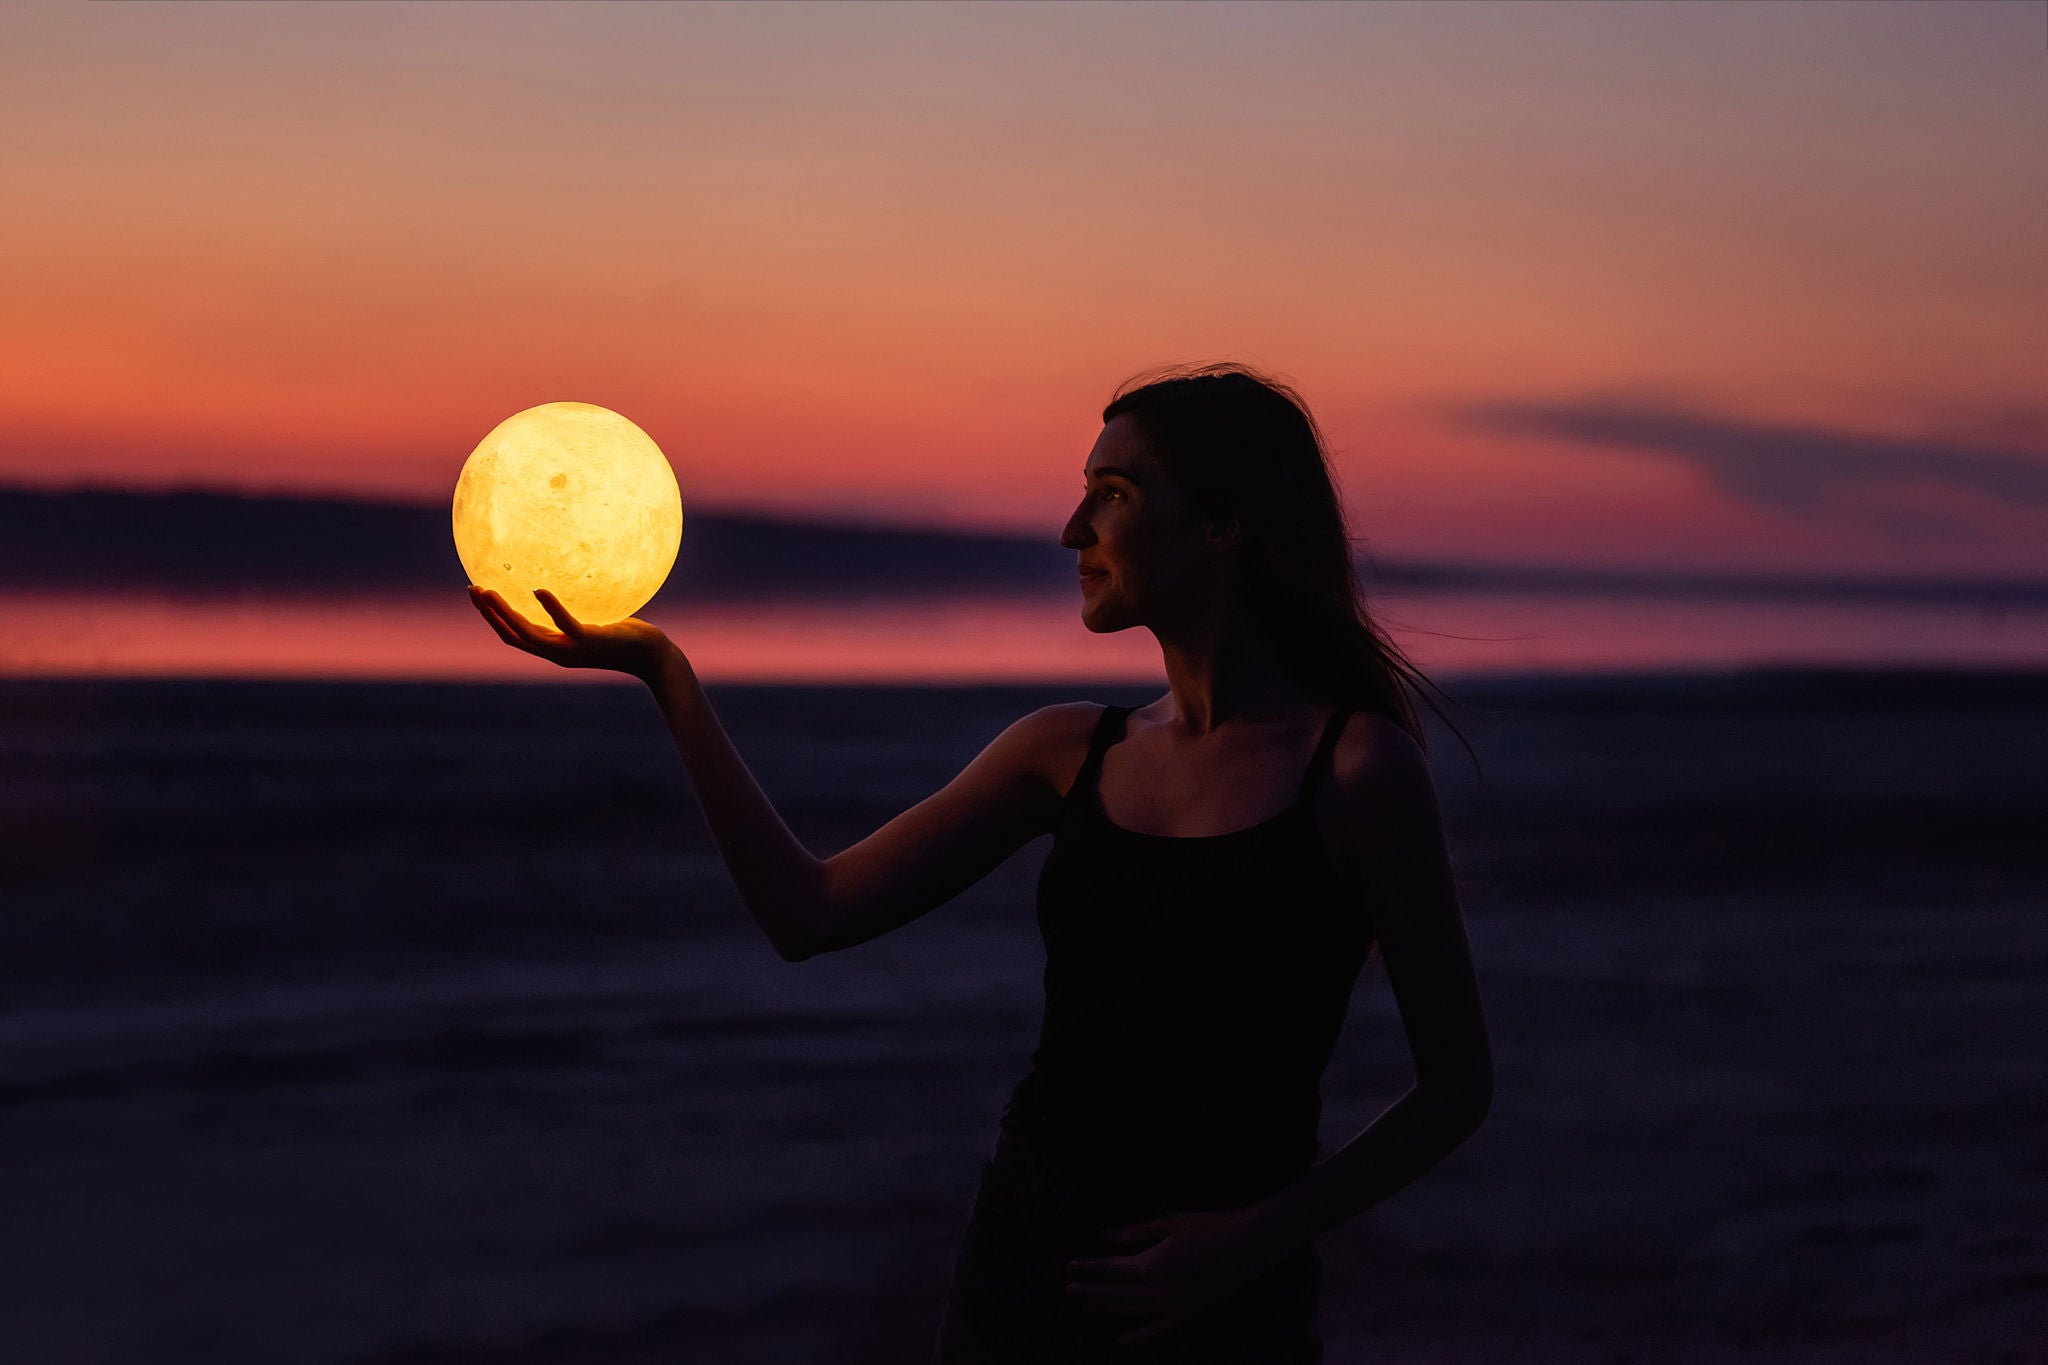 A young woman holds the full moon in her hands against the backdrop of a red sunset. Millennial blogger leads social media. Girl silhouette portrait. Astrology, Waxing Crescent. Copy space